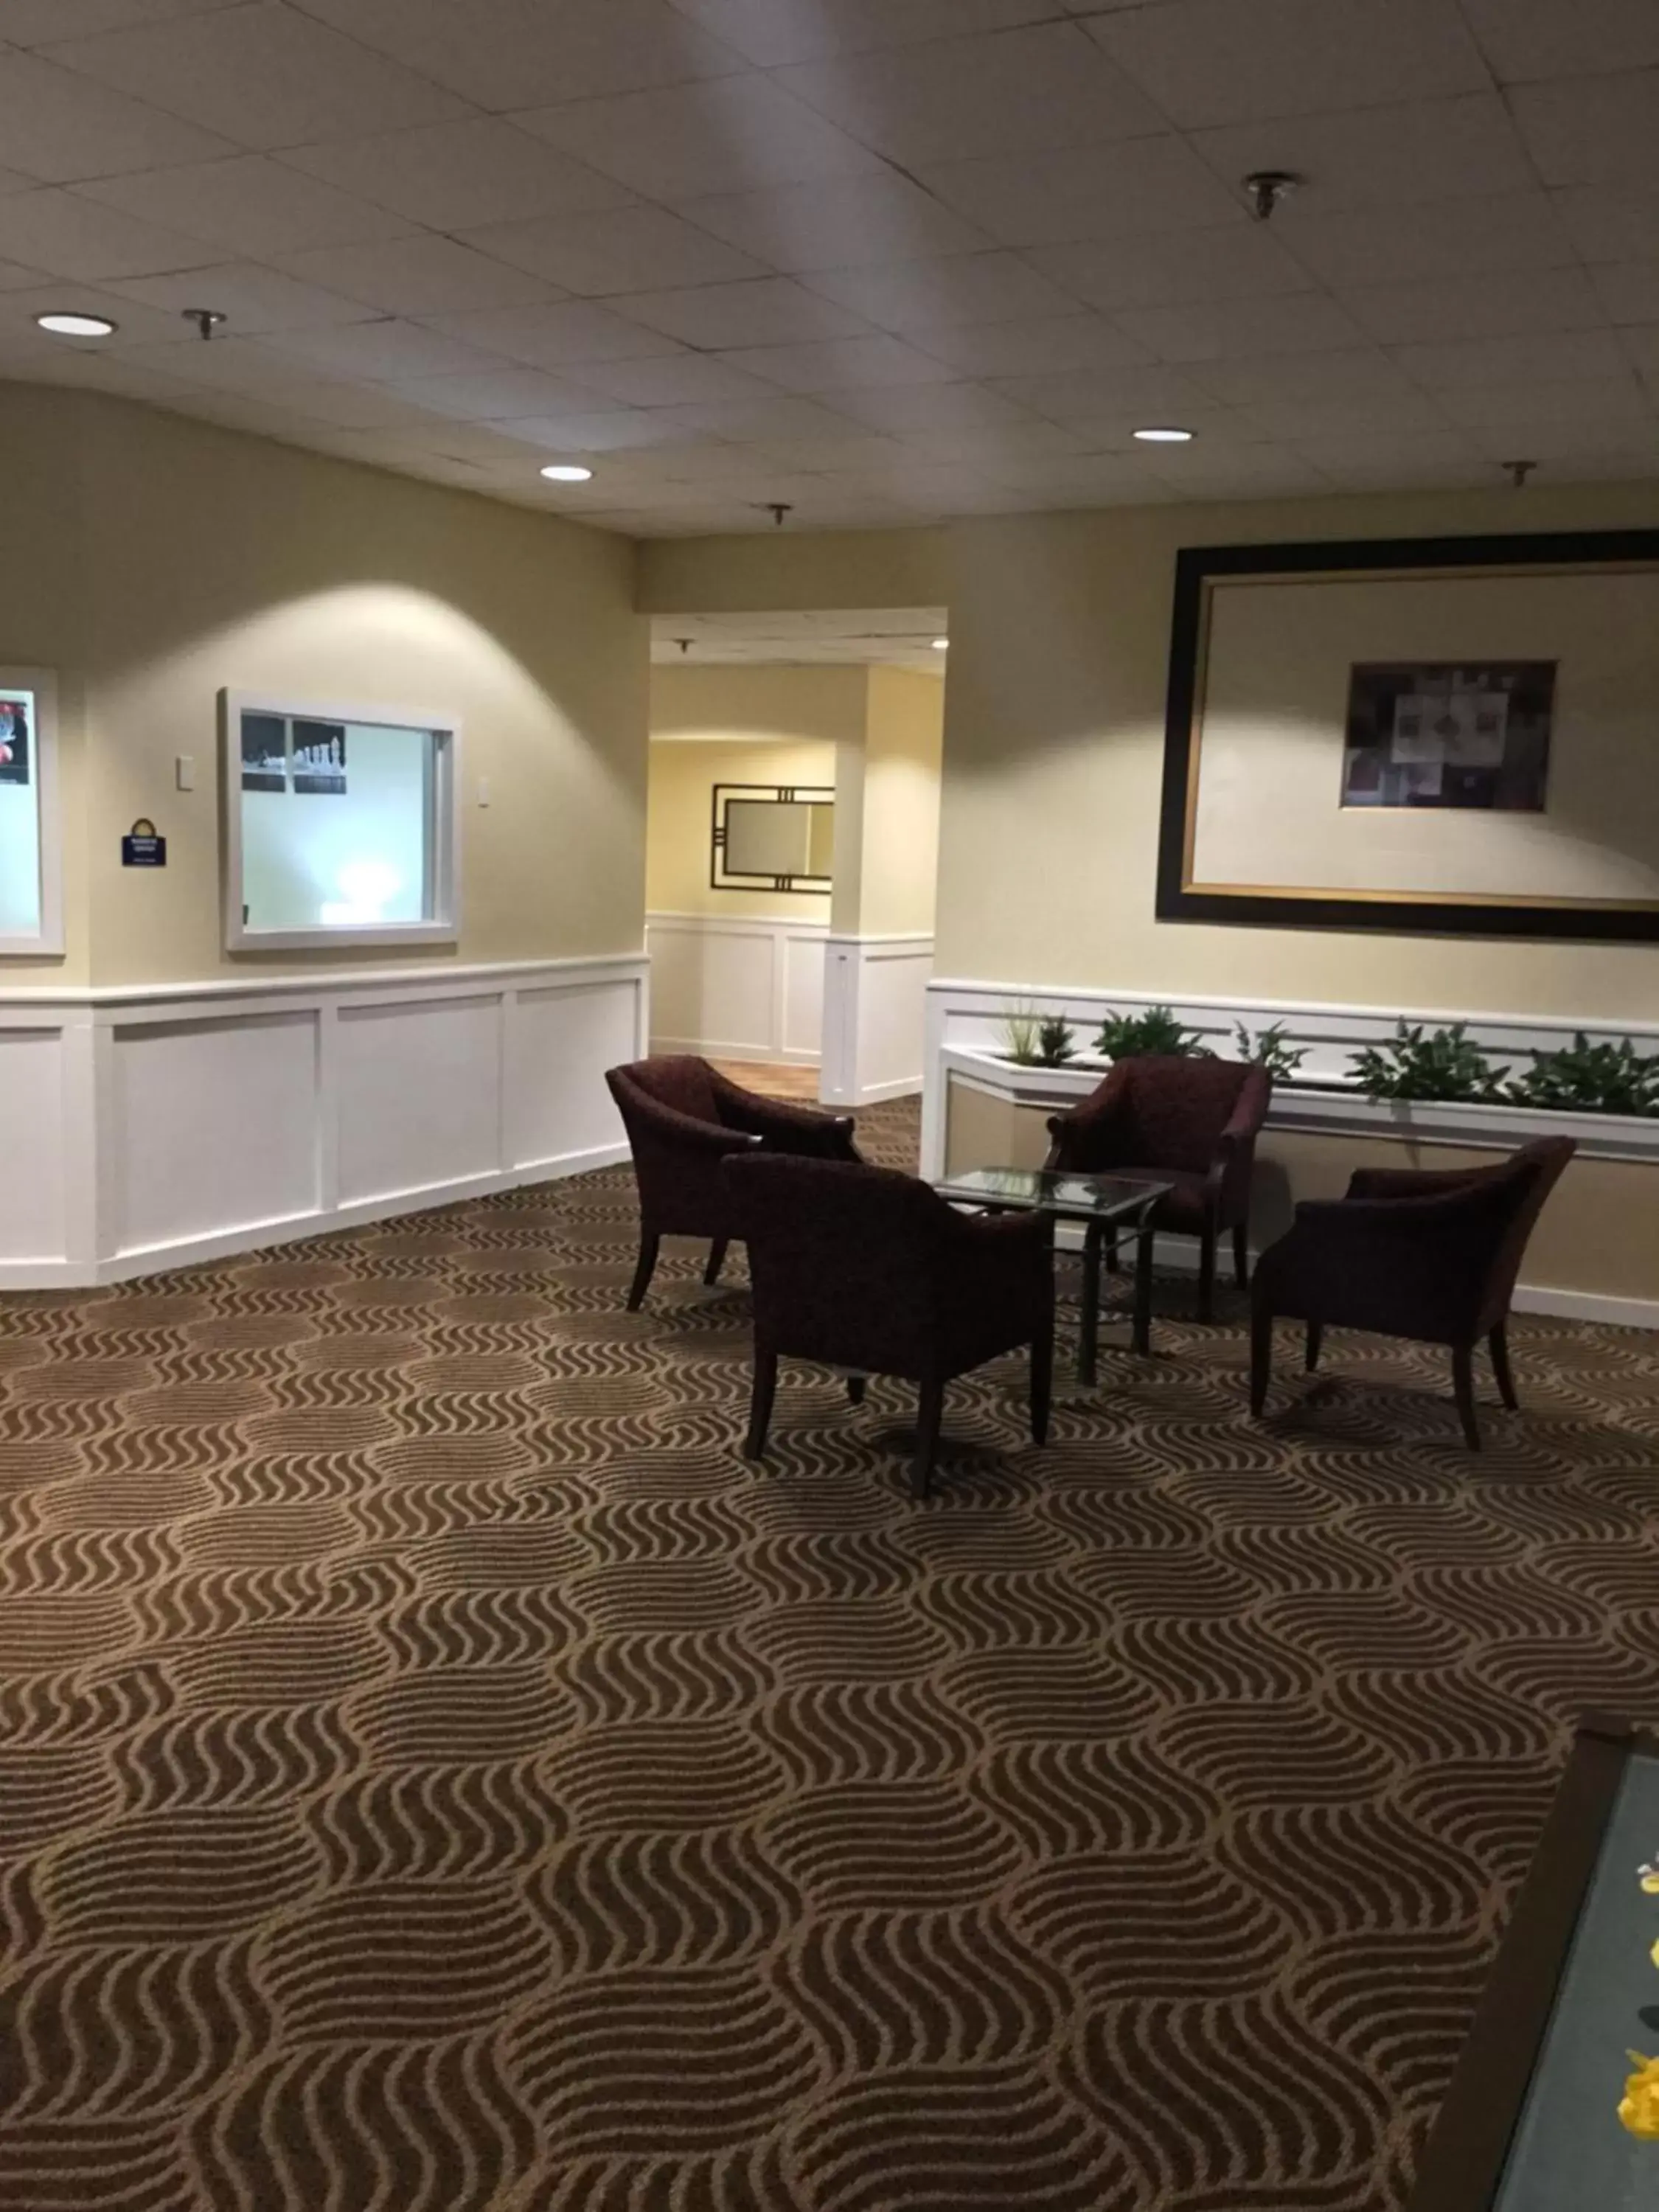 Days Inn & Suites by Wyndham Tallahassee Conf Center I-10